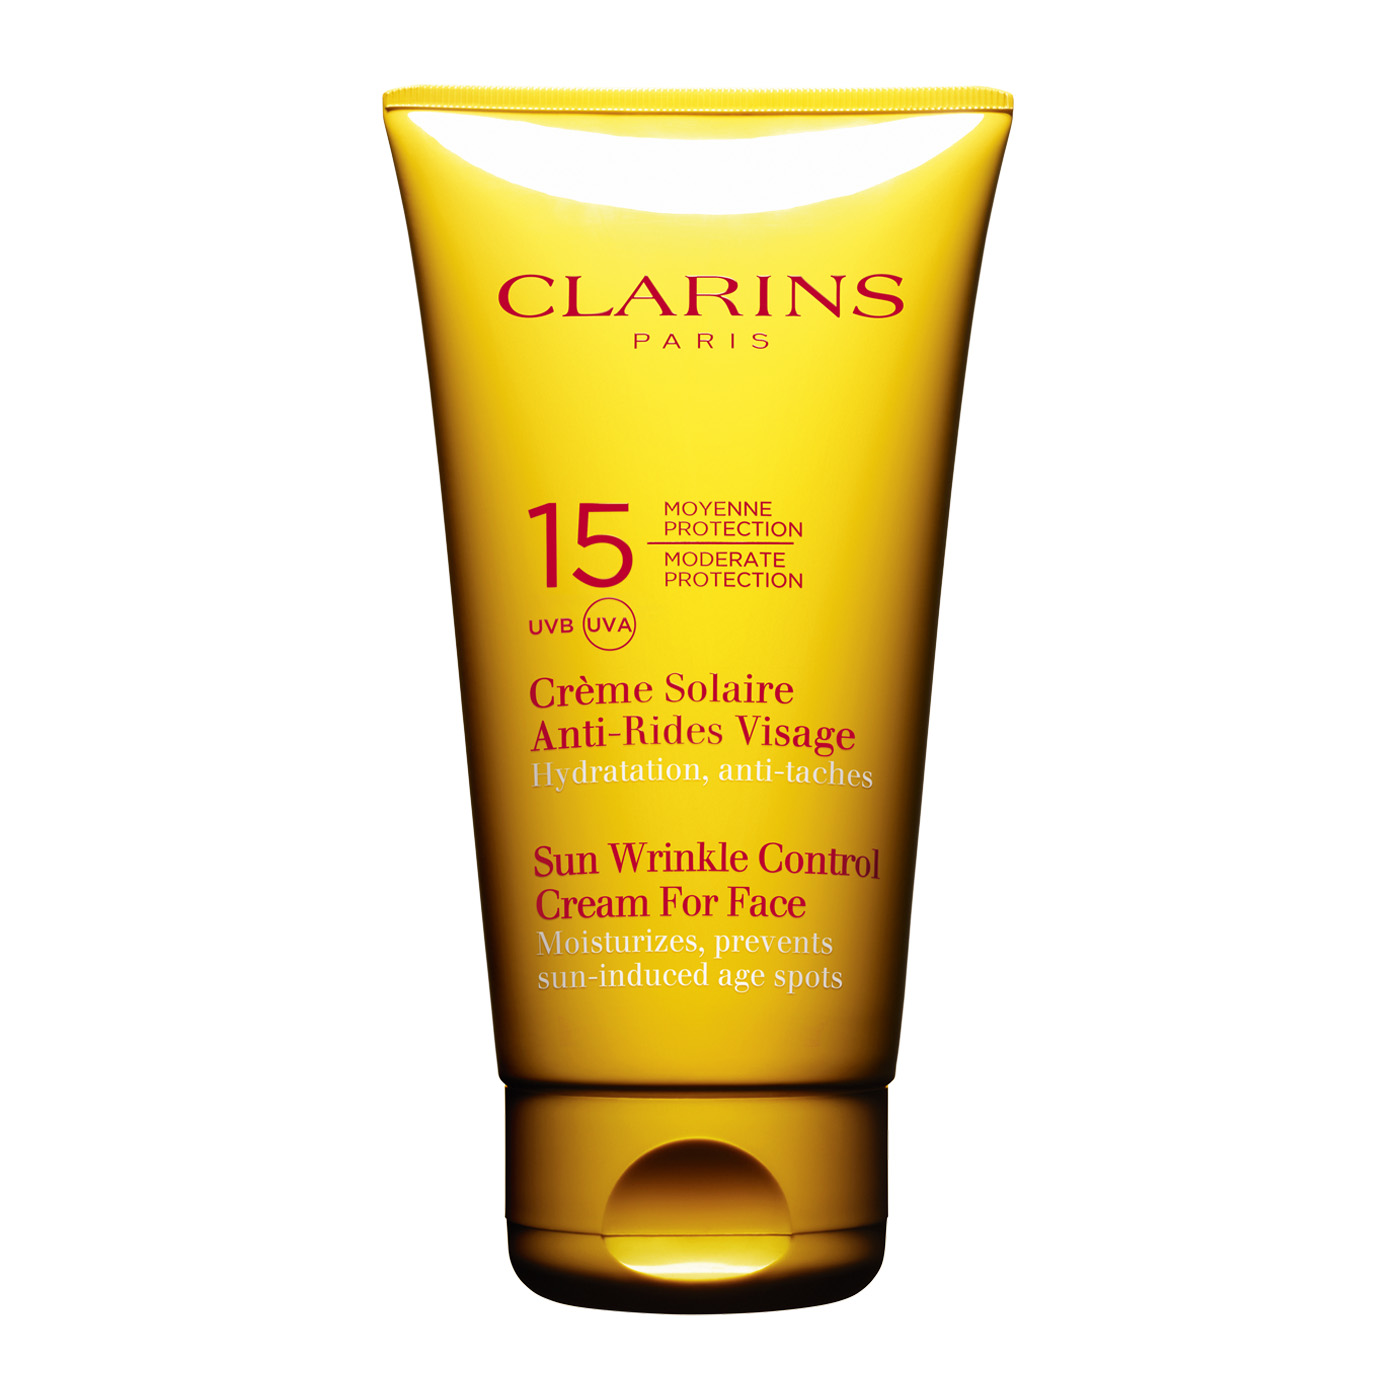 Sun Wrinkle Control Cream For Face Clarins